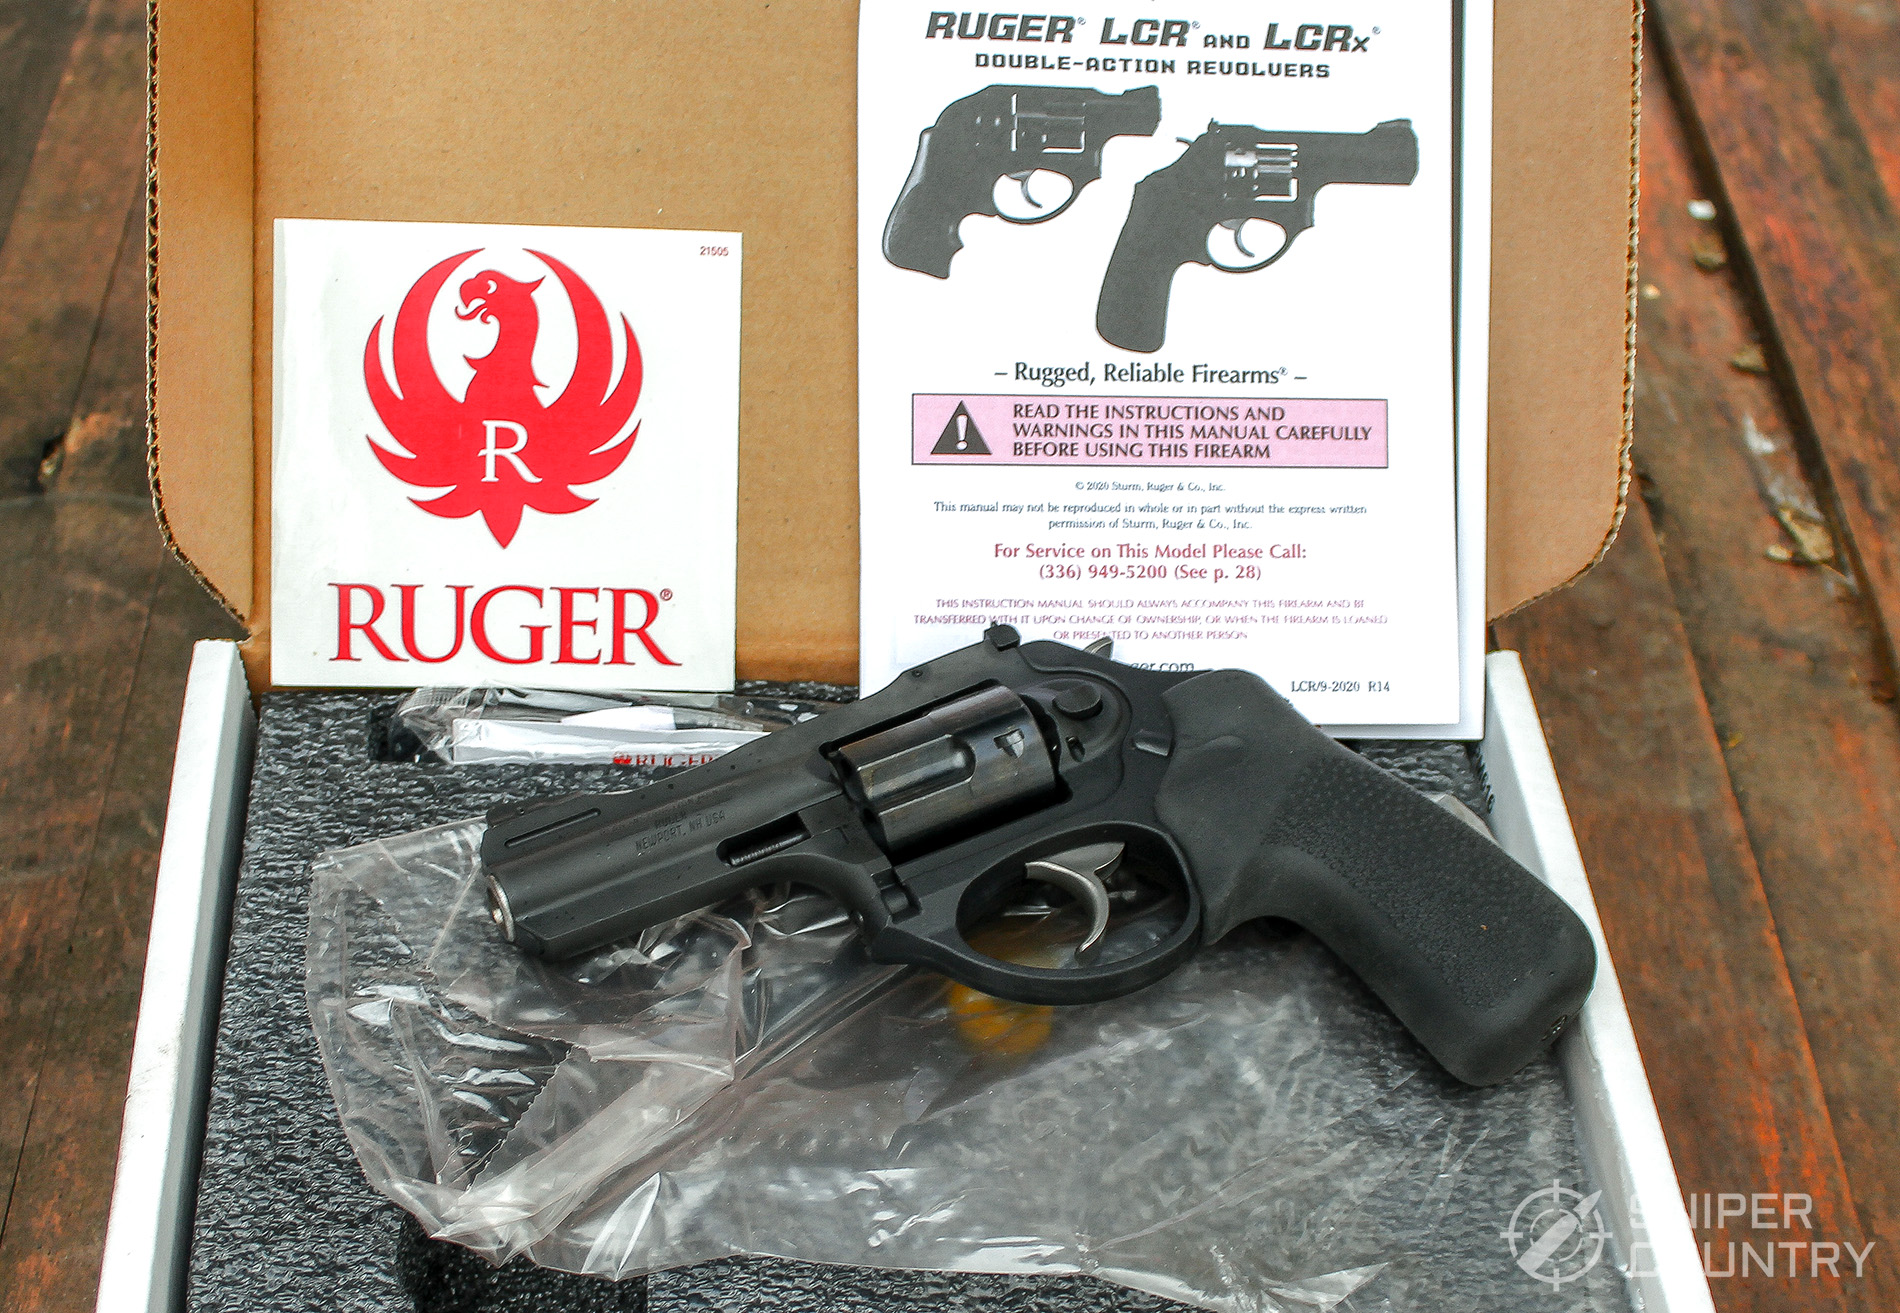 Micro Trigger Stop Holster For Ruger LCR 22 38 Spcl 357 num s20 